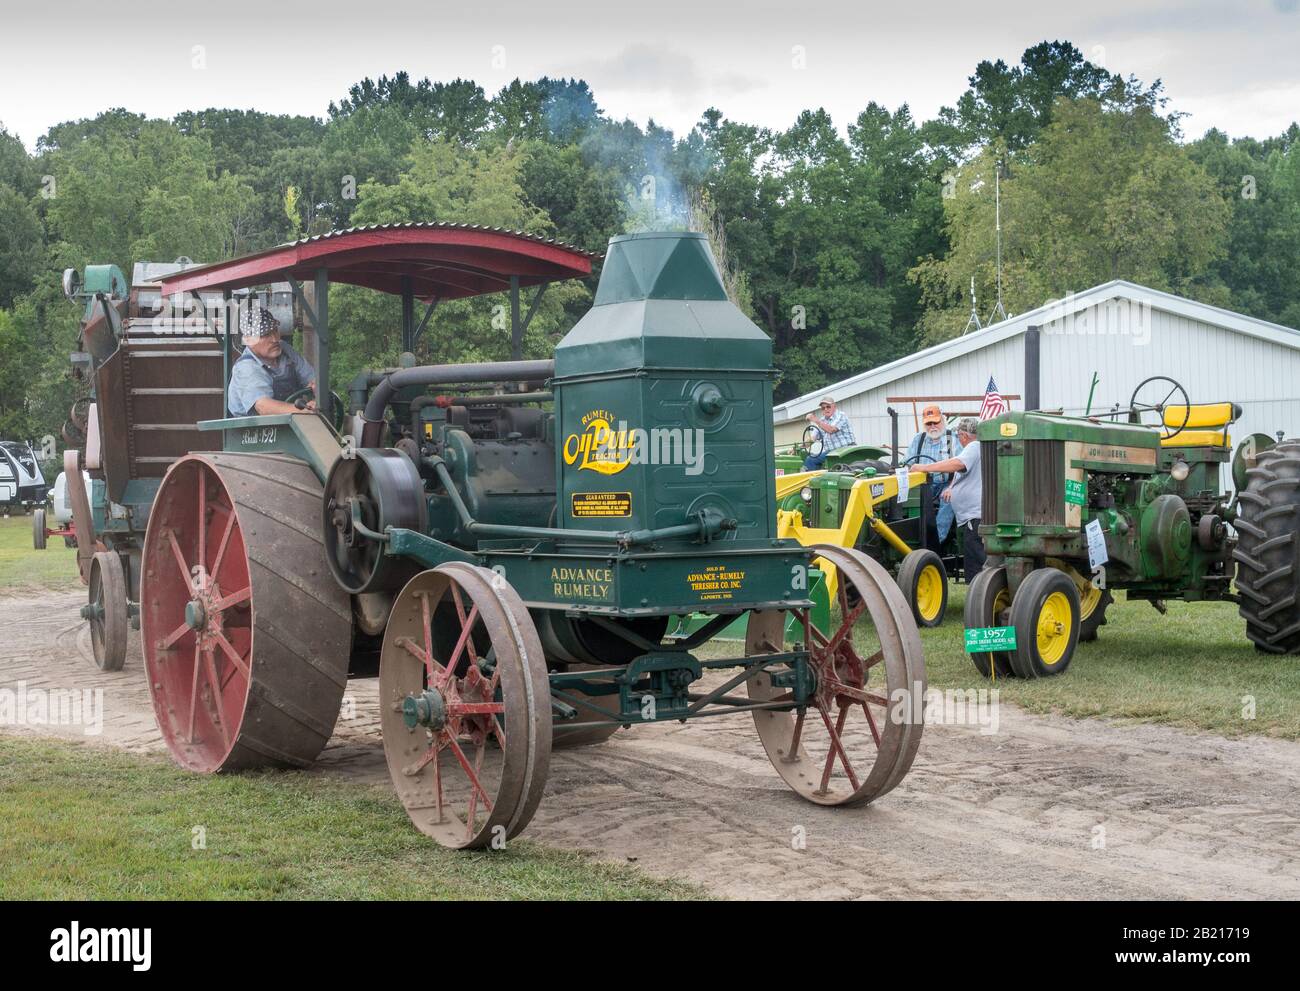 Hesston Indiana USA Aug 31 2019, Antique tractors are on display at a show in hesston Indiana along with the farmers who collect them Stock Photo